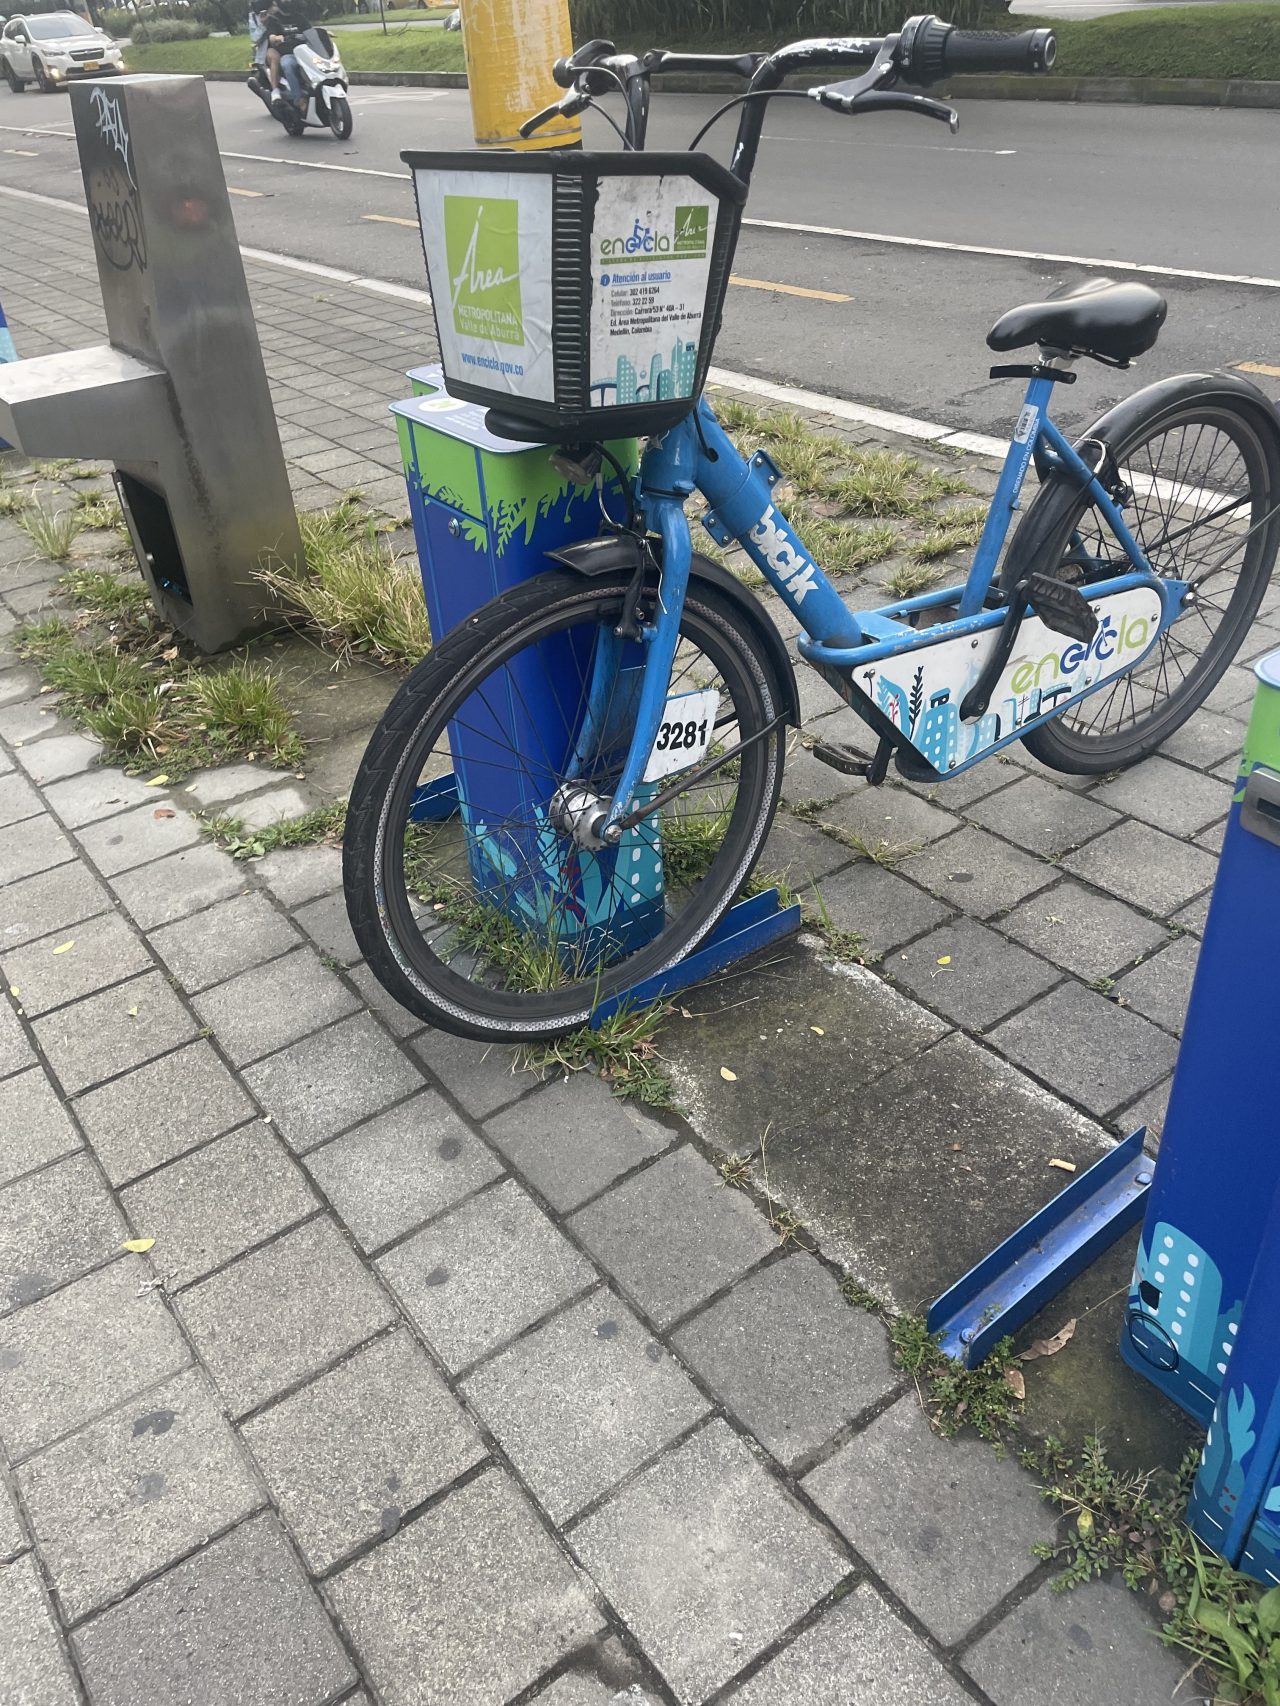 A free bikeshare vehicle I couldn't ride.